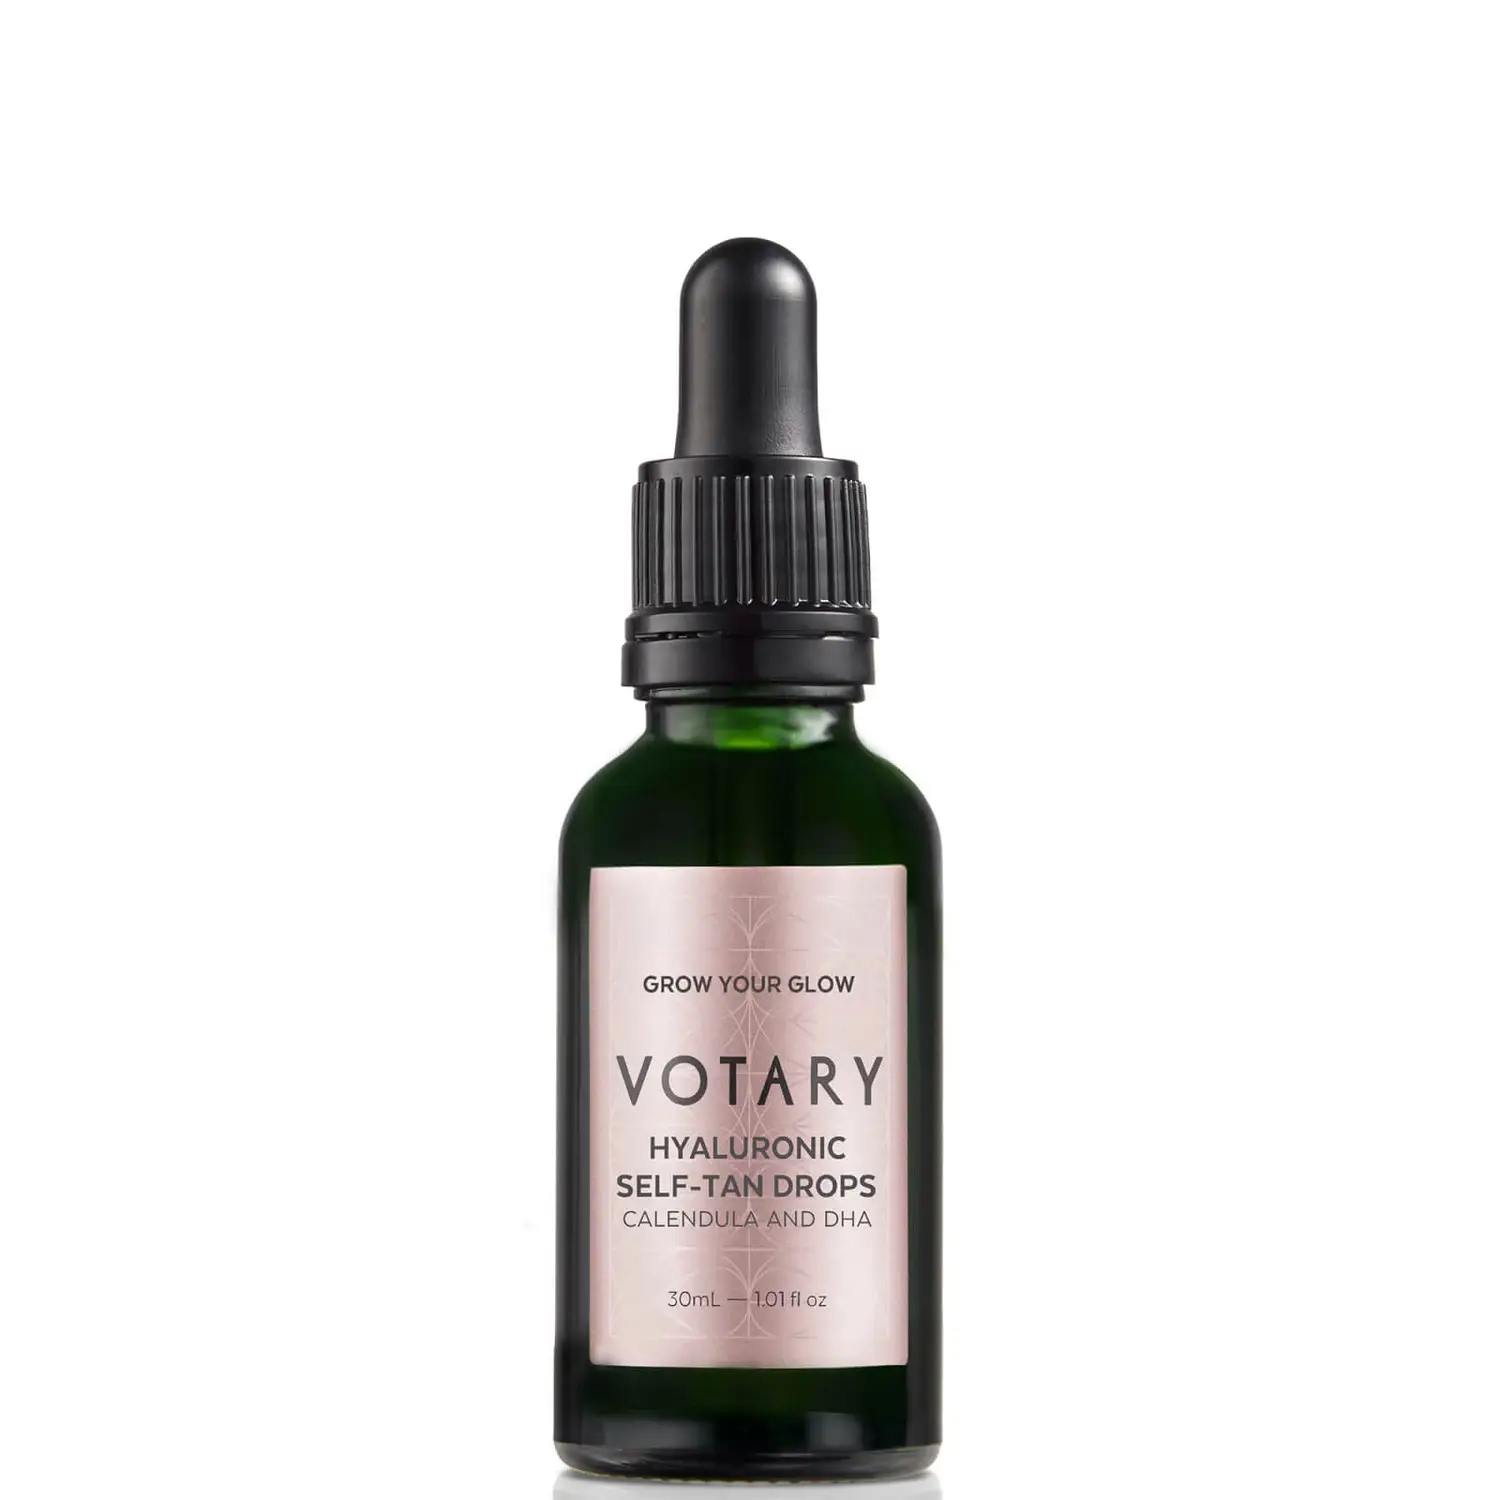 Votary HYALURONIC SELF-TAN DROPS WITH CALENDULA AND DHA